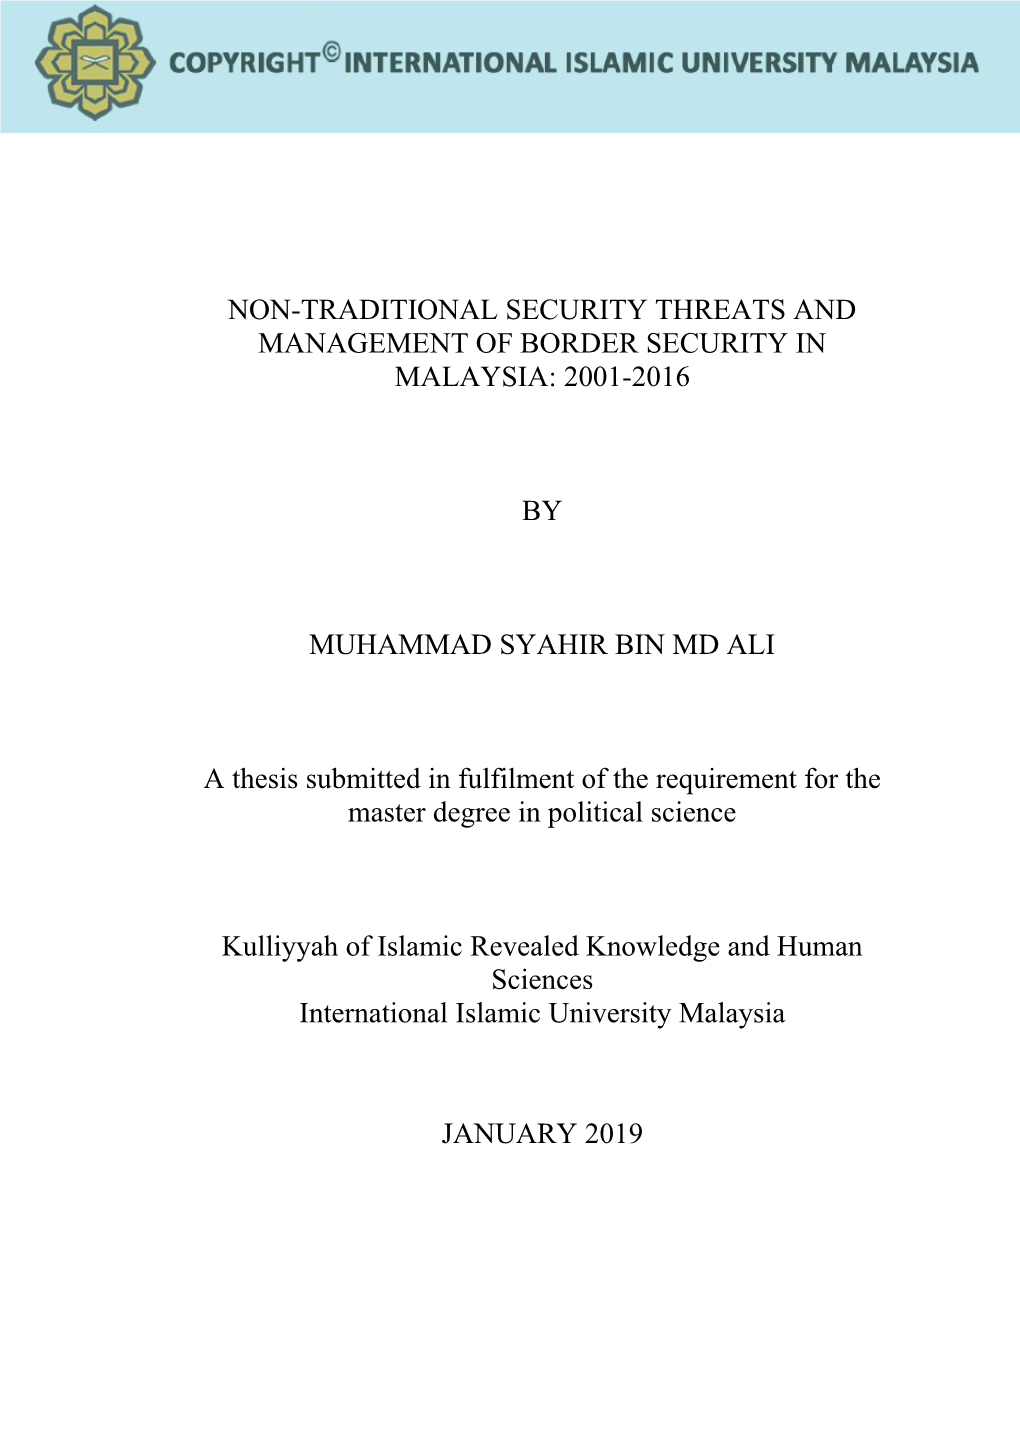 Non-Traditional Security Threats and Management of Border Security in Malaysia: 2001-2016